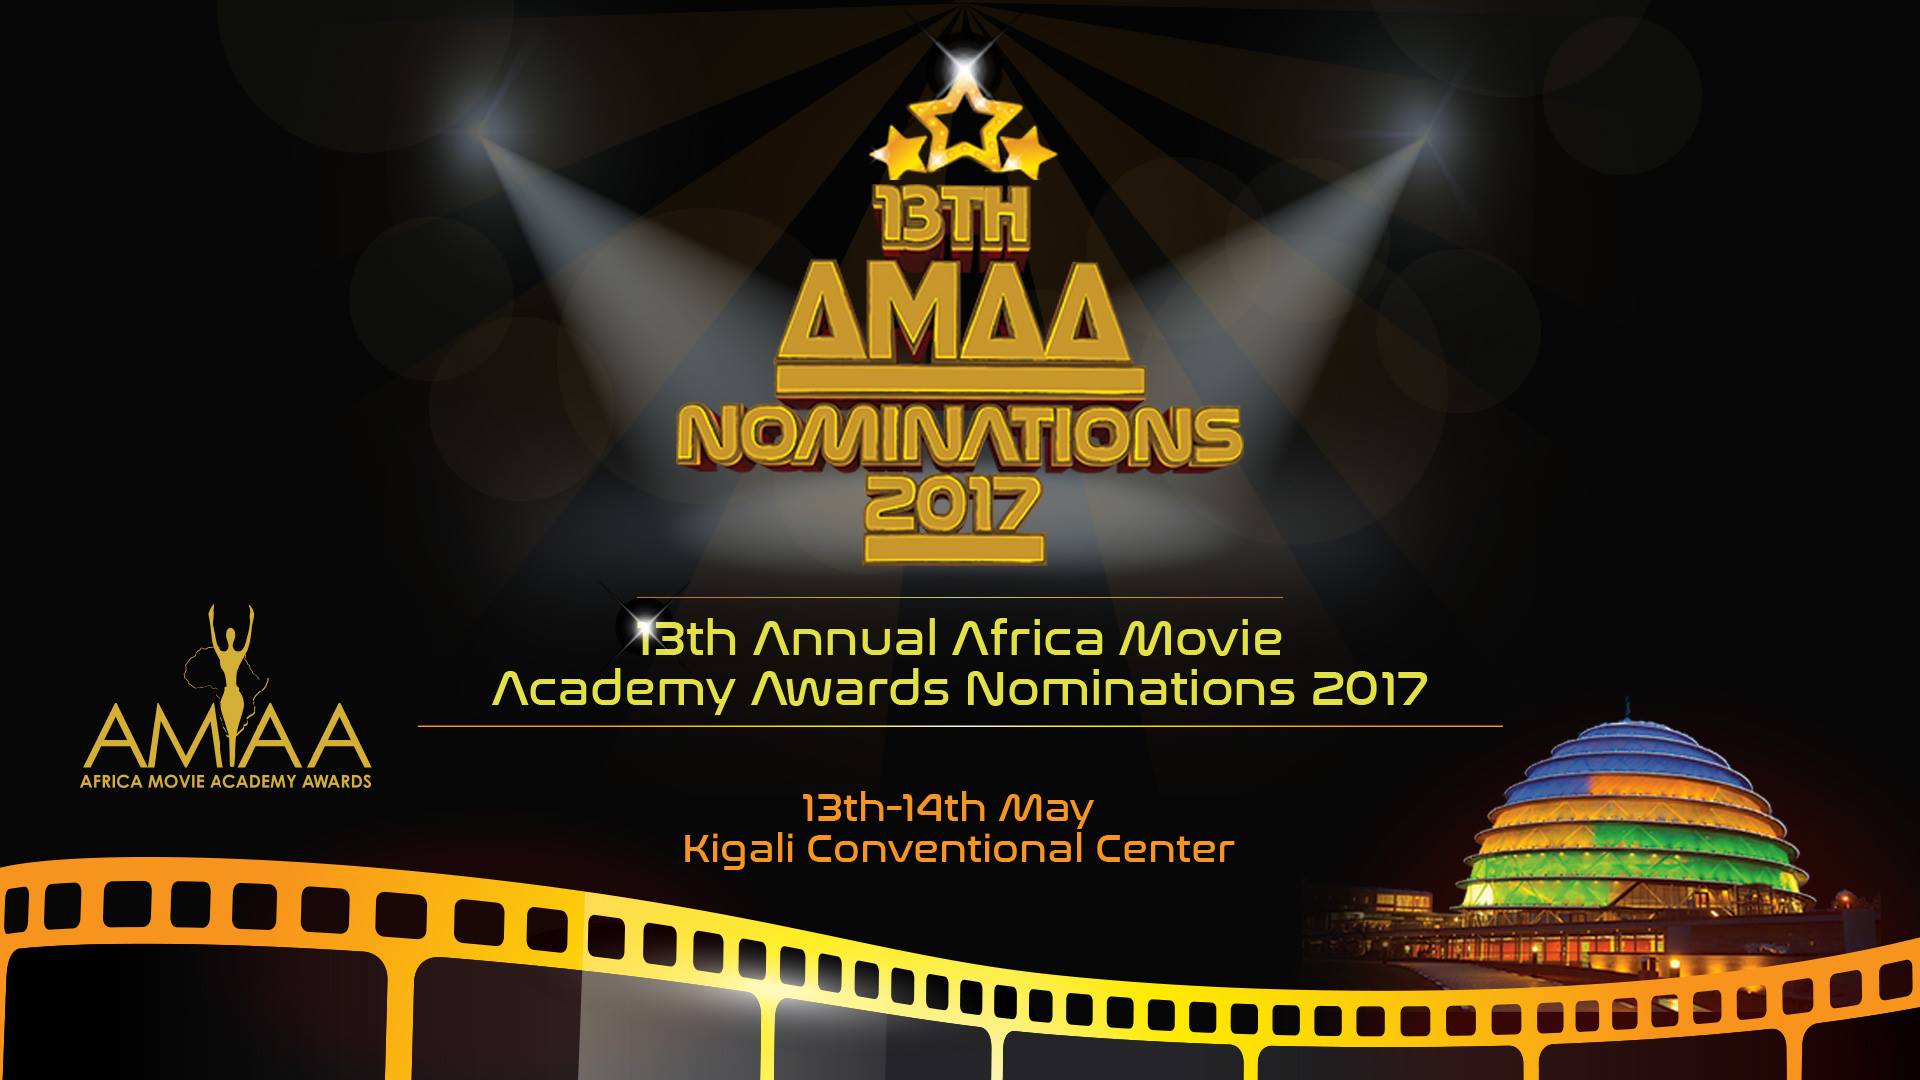 Annual Africa Movie Awards Event Comes to Kigali